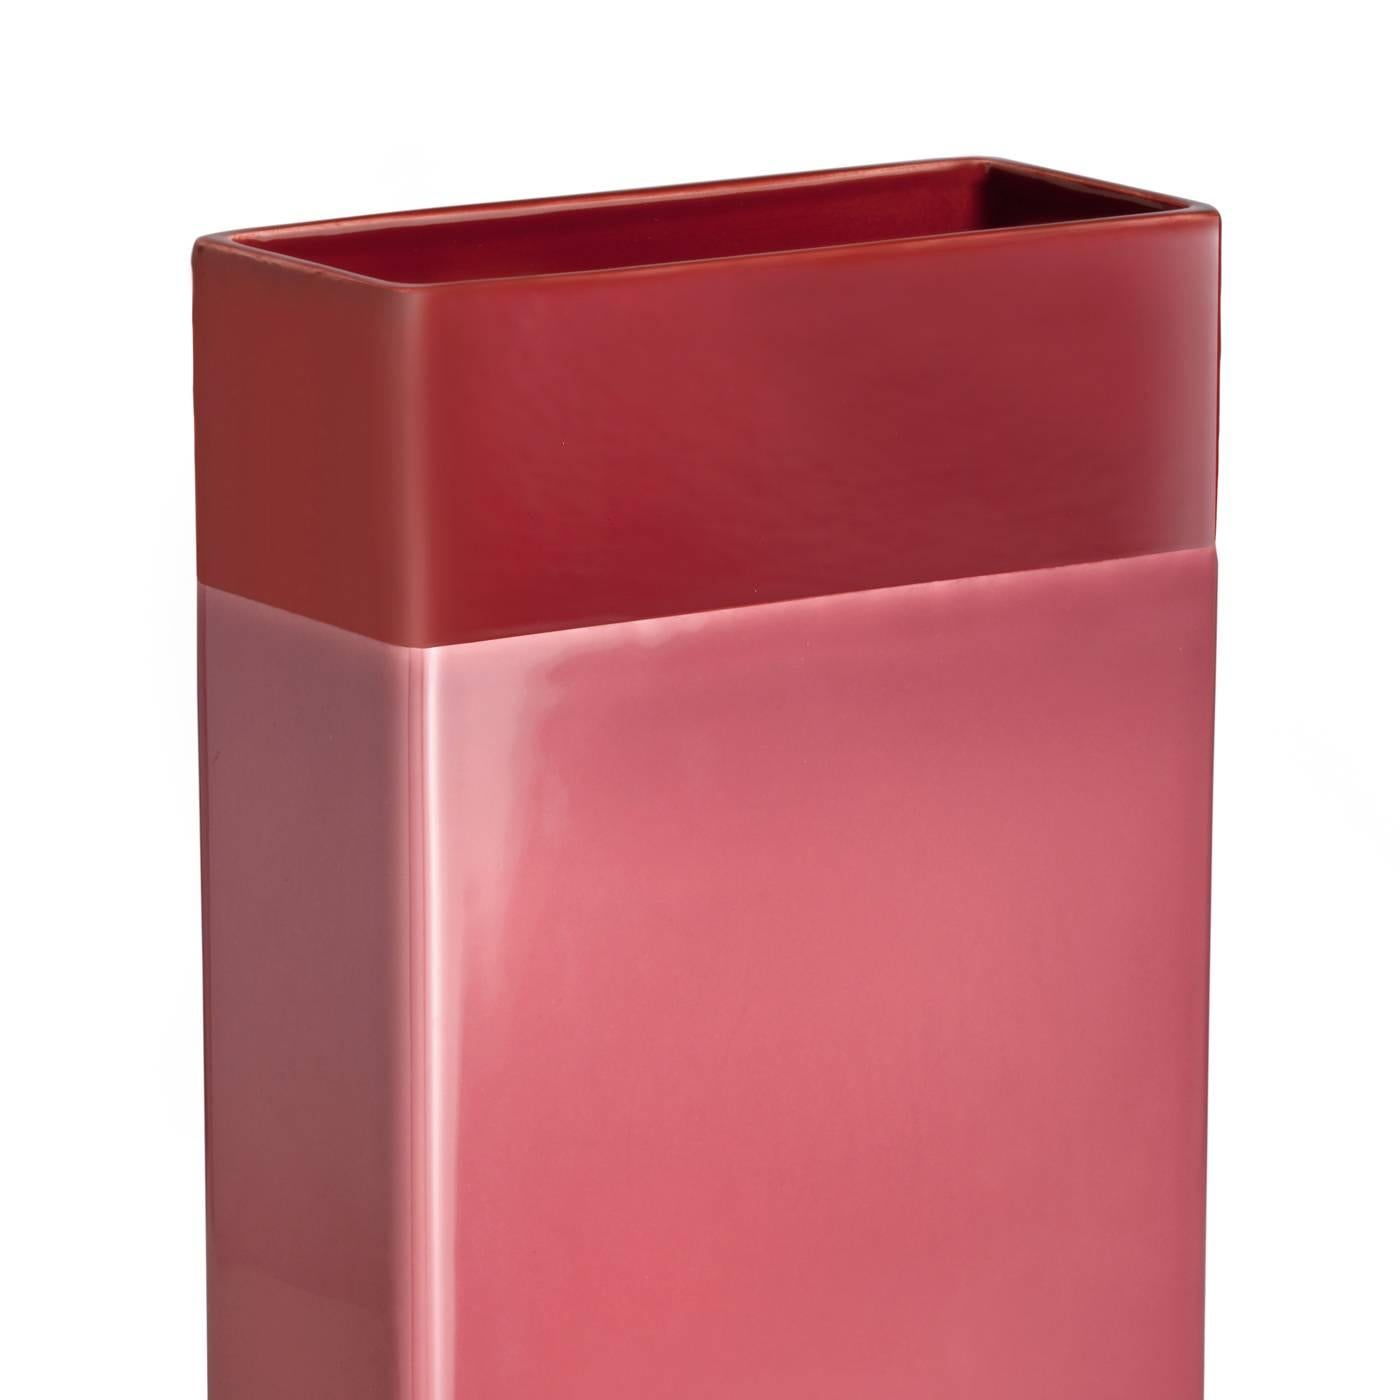 This striking vase has a simple, rectangular shape, highlighted with a brass strip at the bottom and two different solid finishes, one large strip in pink and a vivid red top. The piece in white clay was designed in 2016 by Dimore Studio for Bitossi.